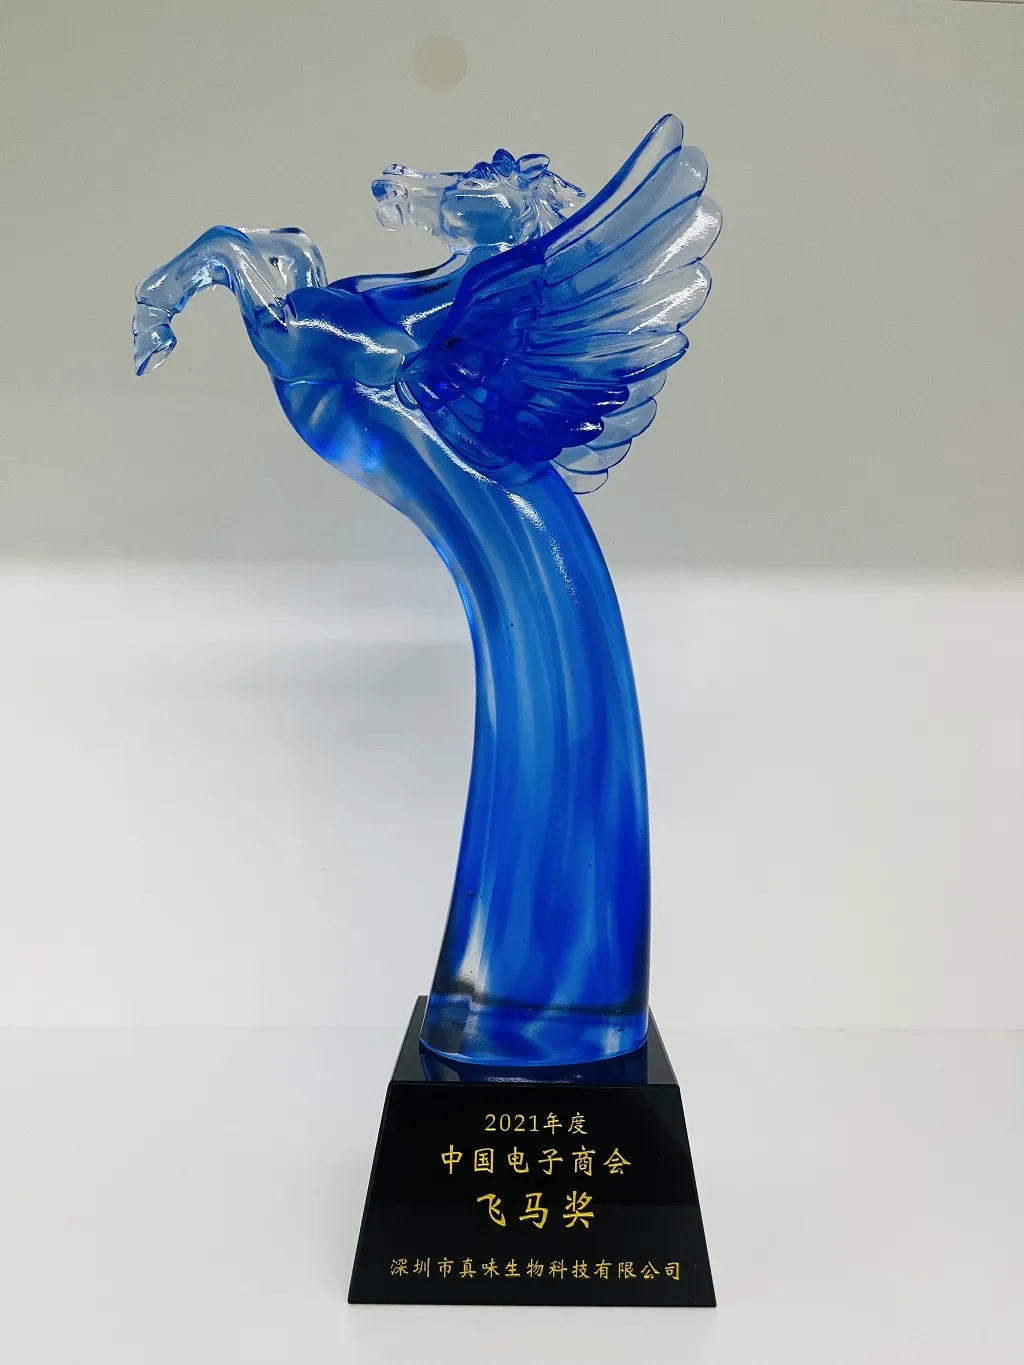 Zinwi Biotech, with its rich industry experience, strong research strength, and continuous growth in the field of e-liquids, has been awarded the "2021 China Electronics Chamber of Commerce Pegasus Award."